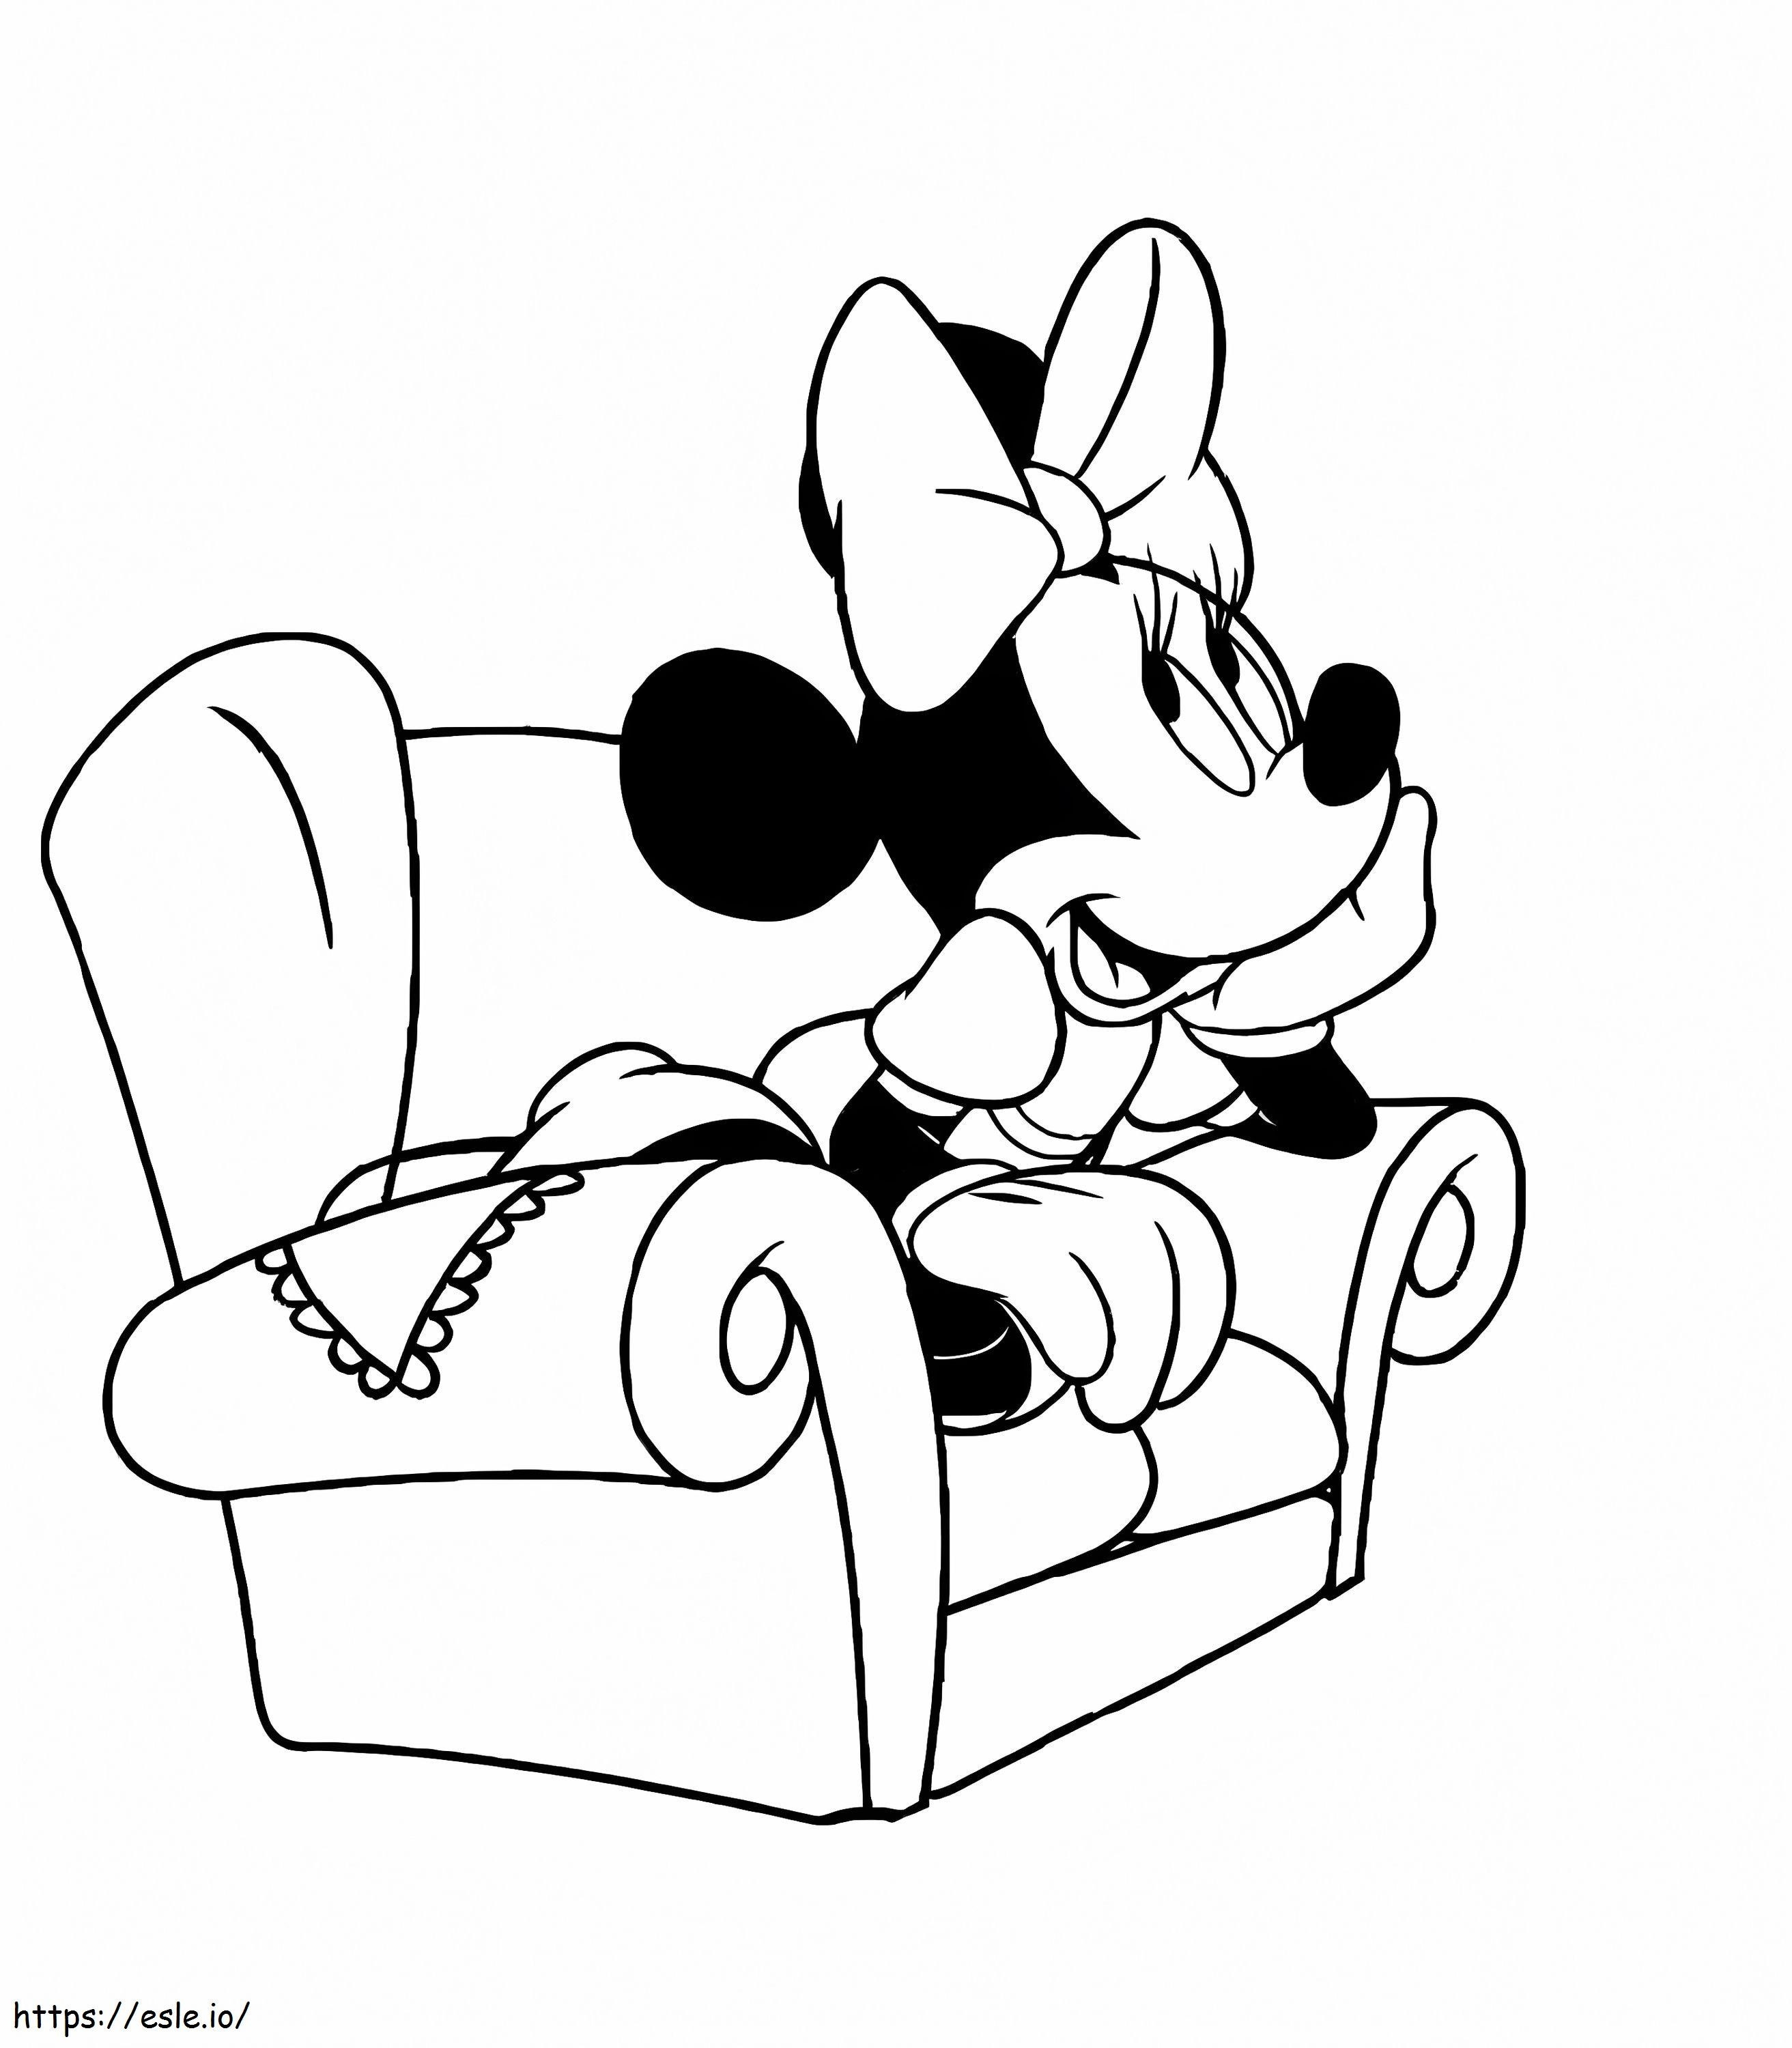 Minnie Mouse On A Chair coloring page